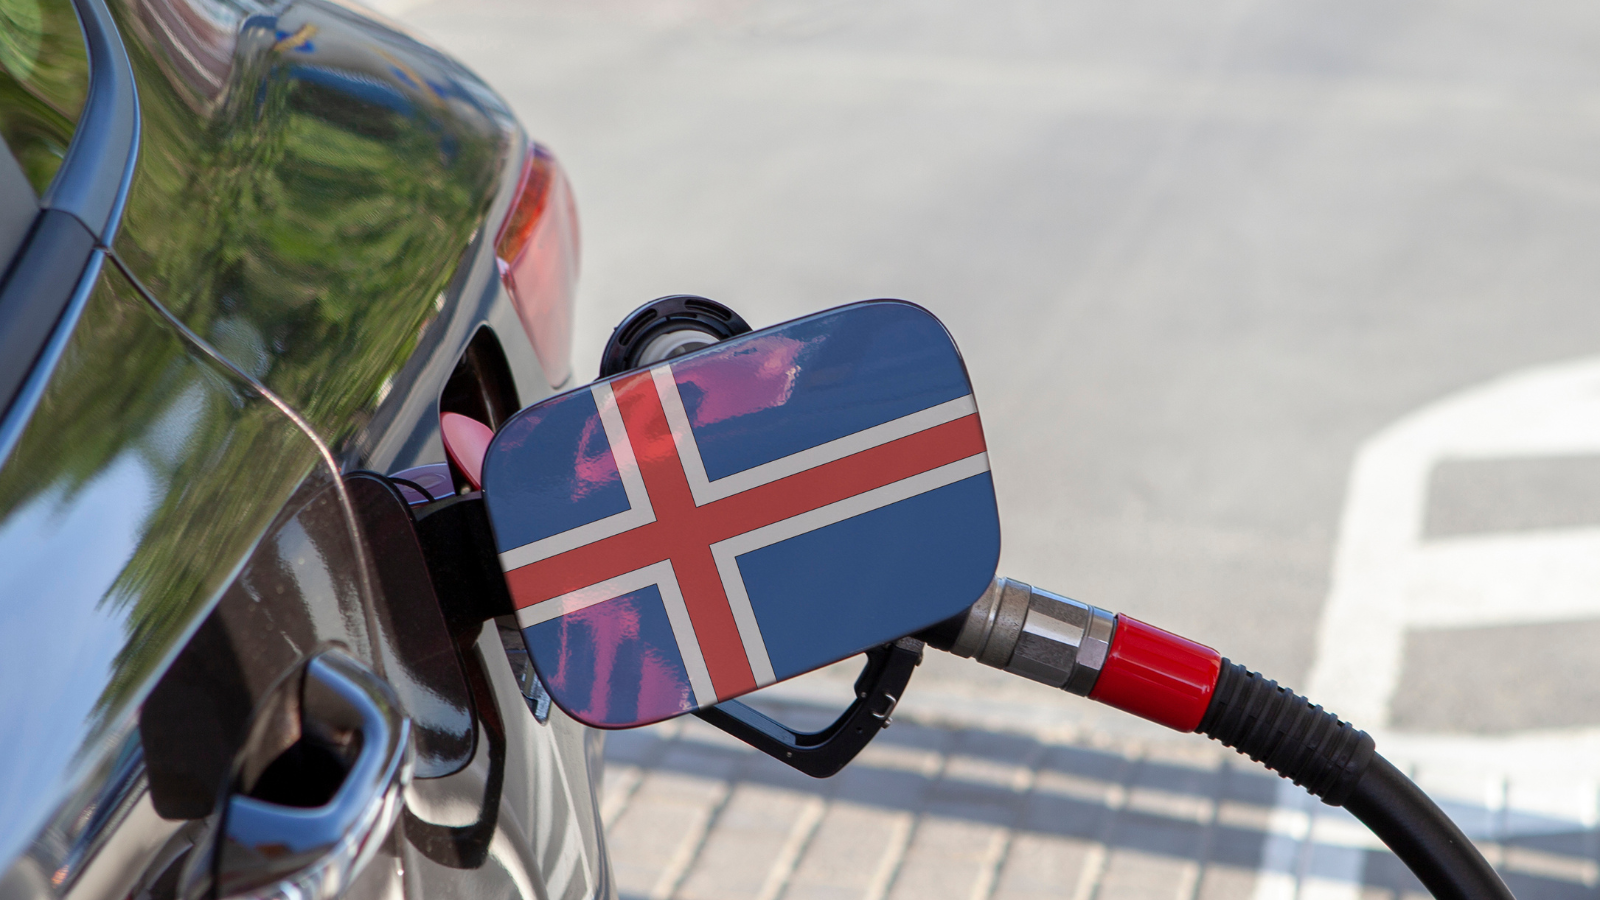 Flag of Iceland on the car's fuel tank flap and pump fueling the car at a gas station